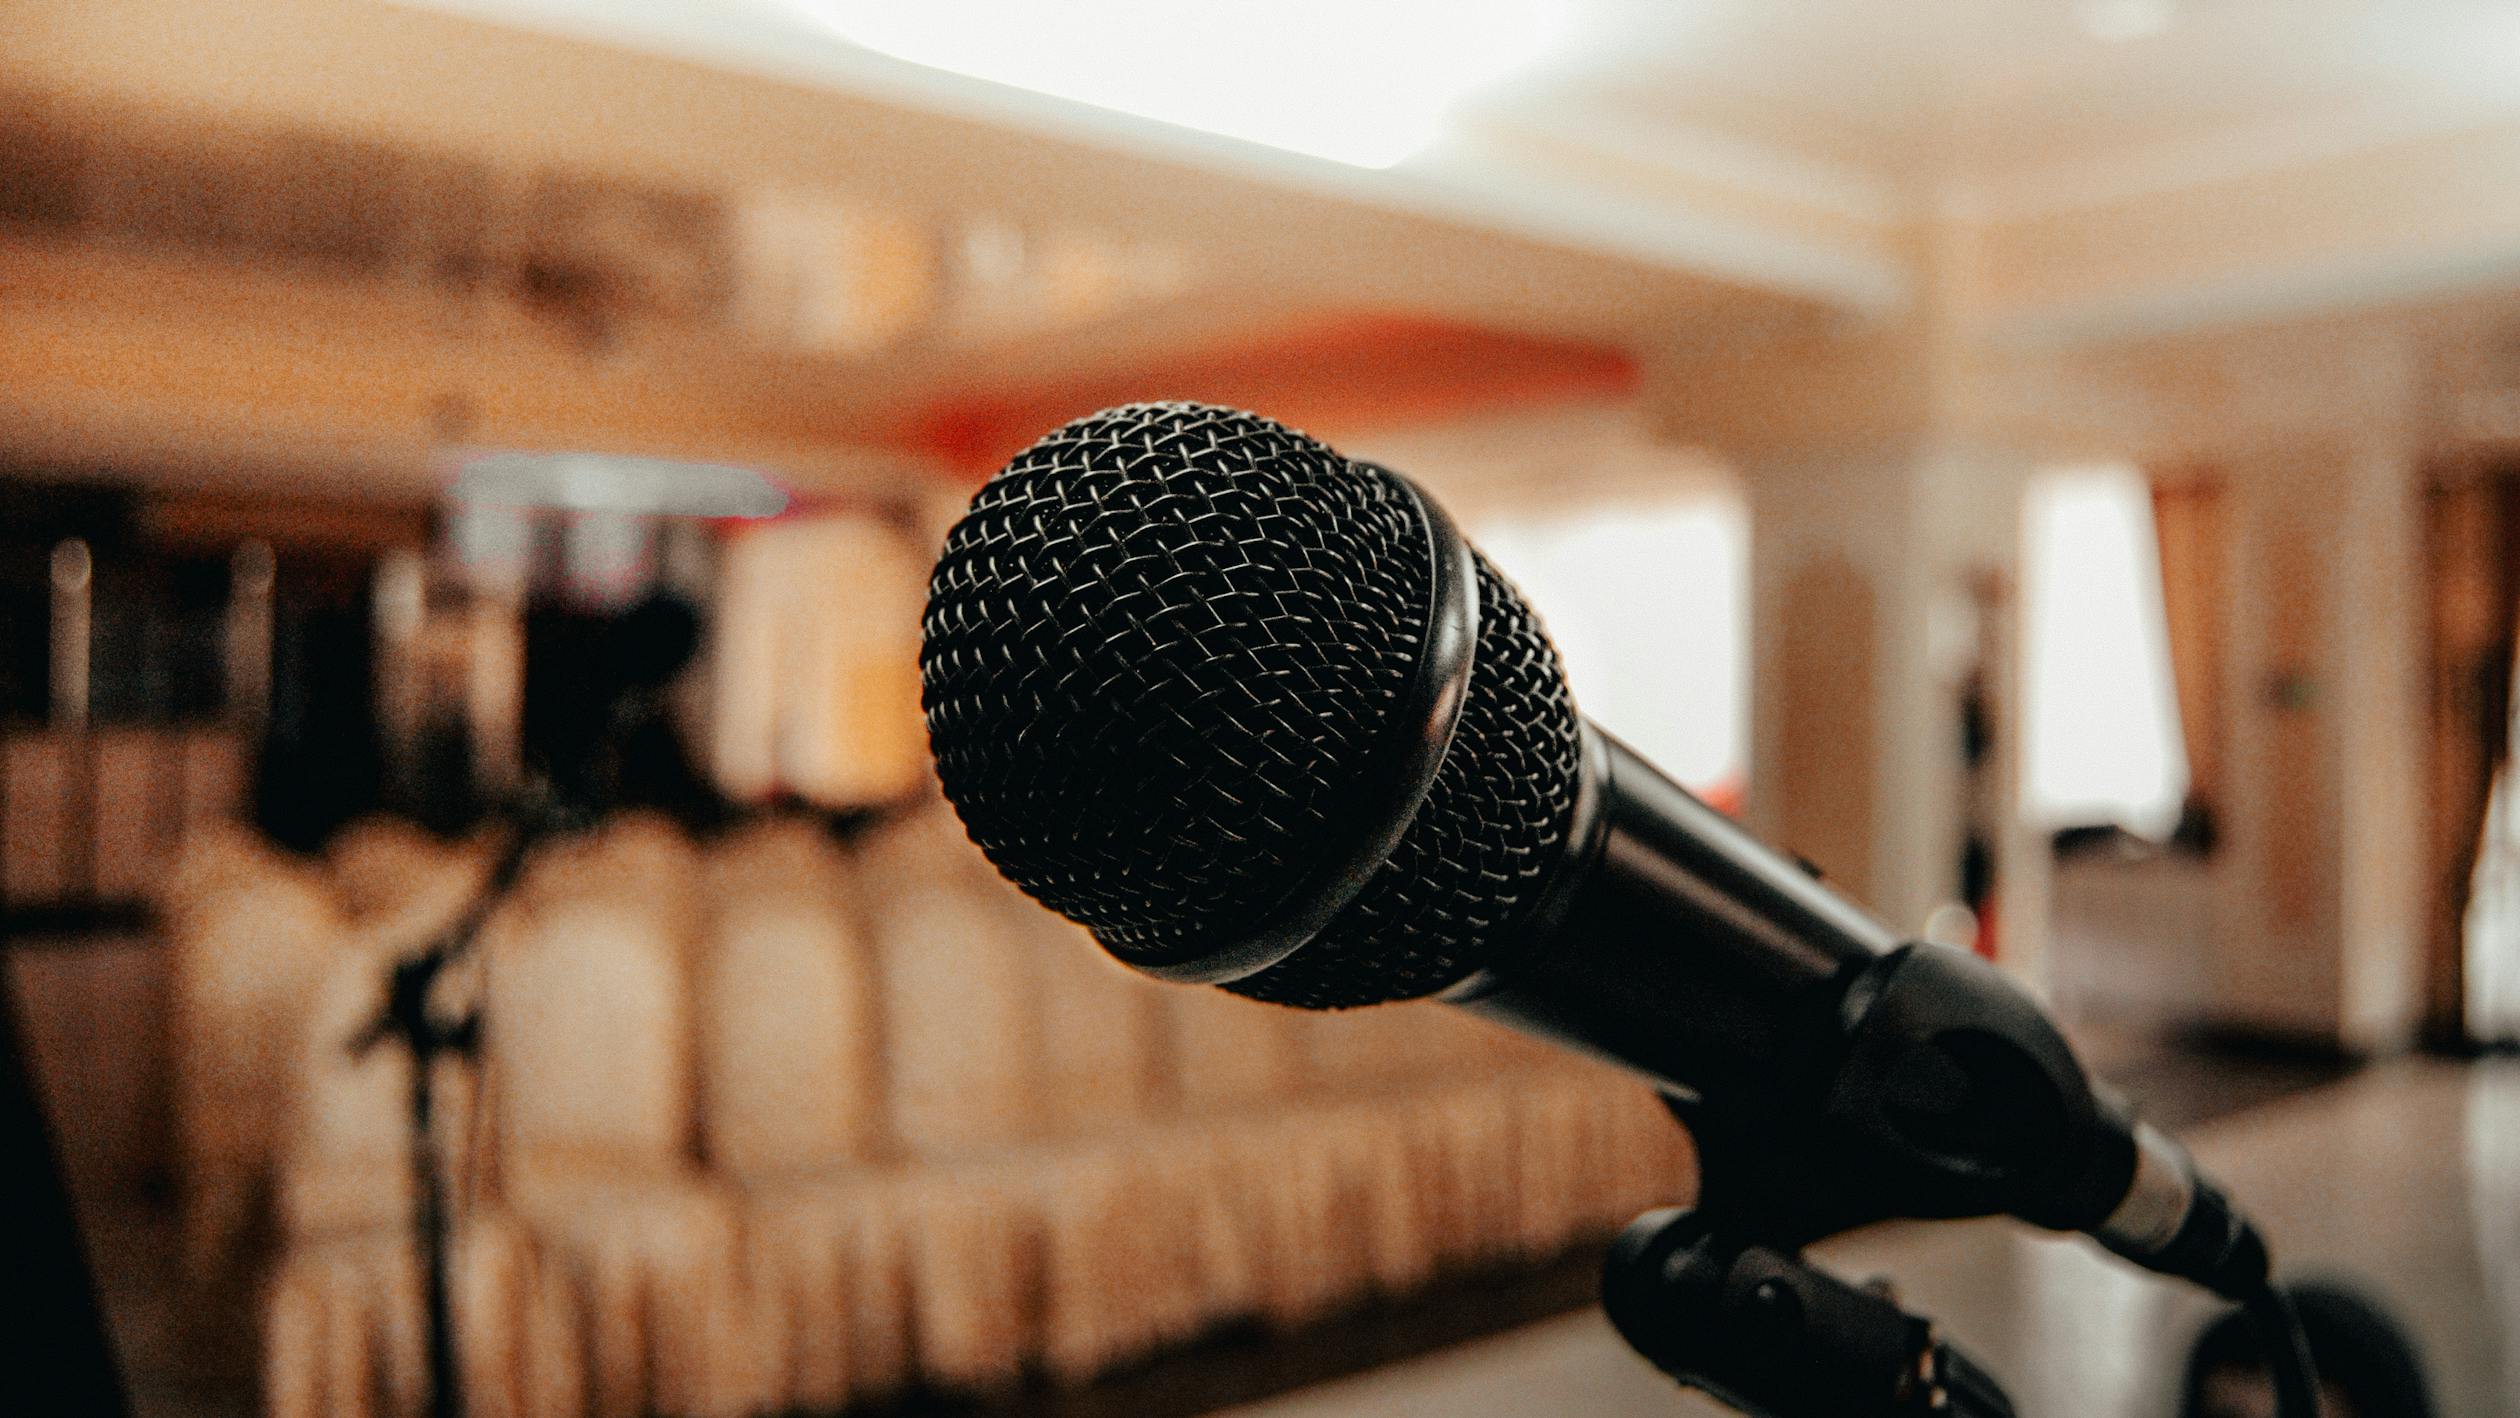 Public Speaking Photo by Borta from Pexels: https://www.pexels.com/photo/black-microphone-in-light-conference-hall-4331578/